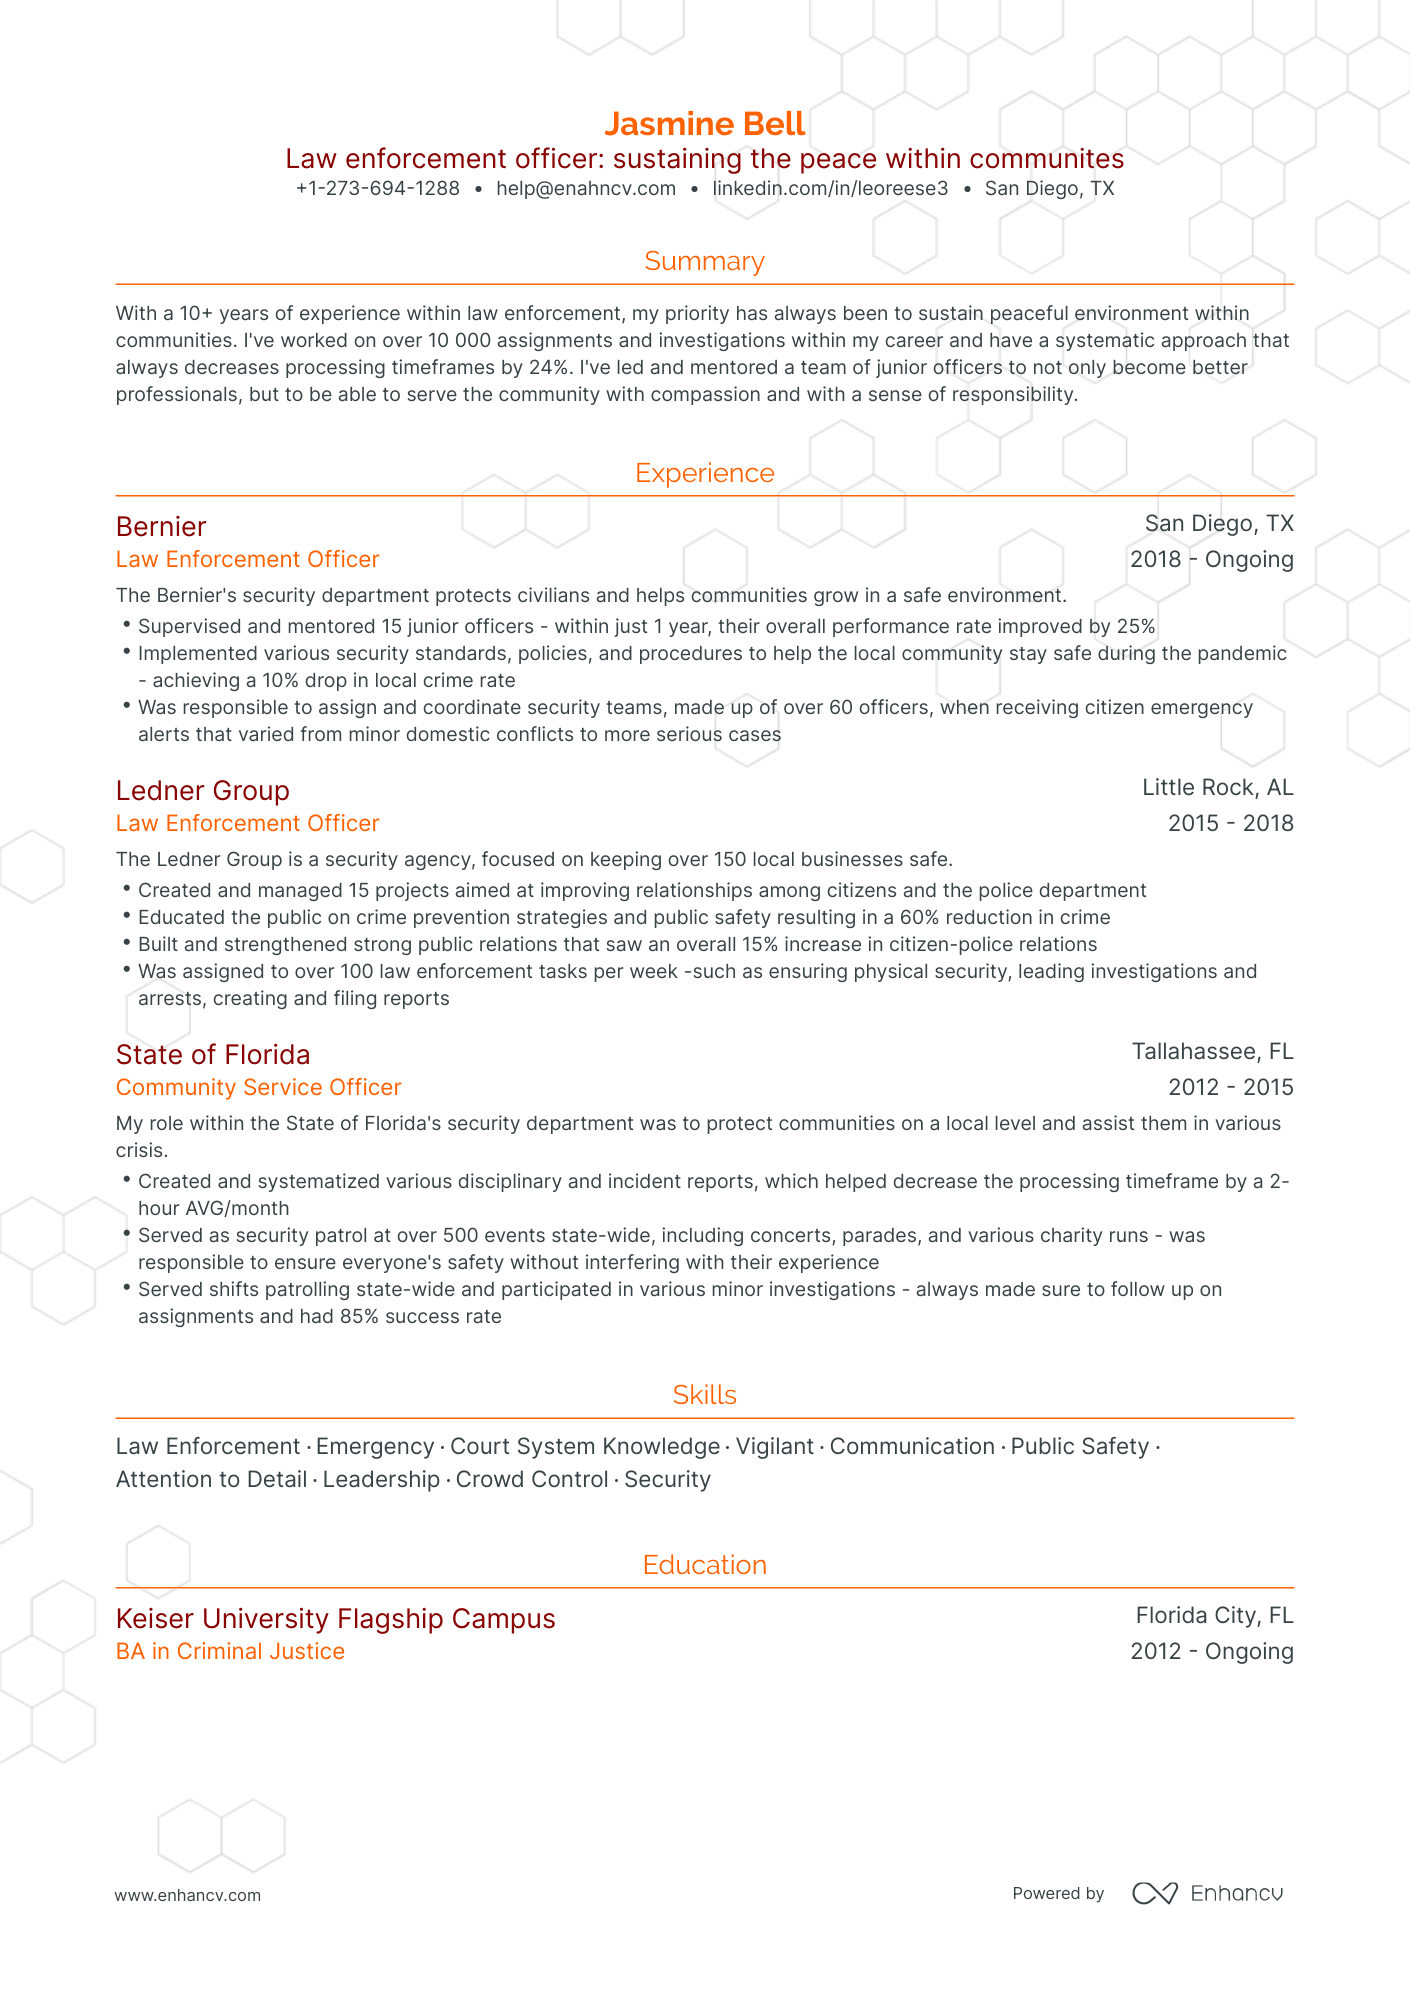 Traditional Law Enforcement Resume Template